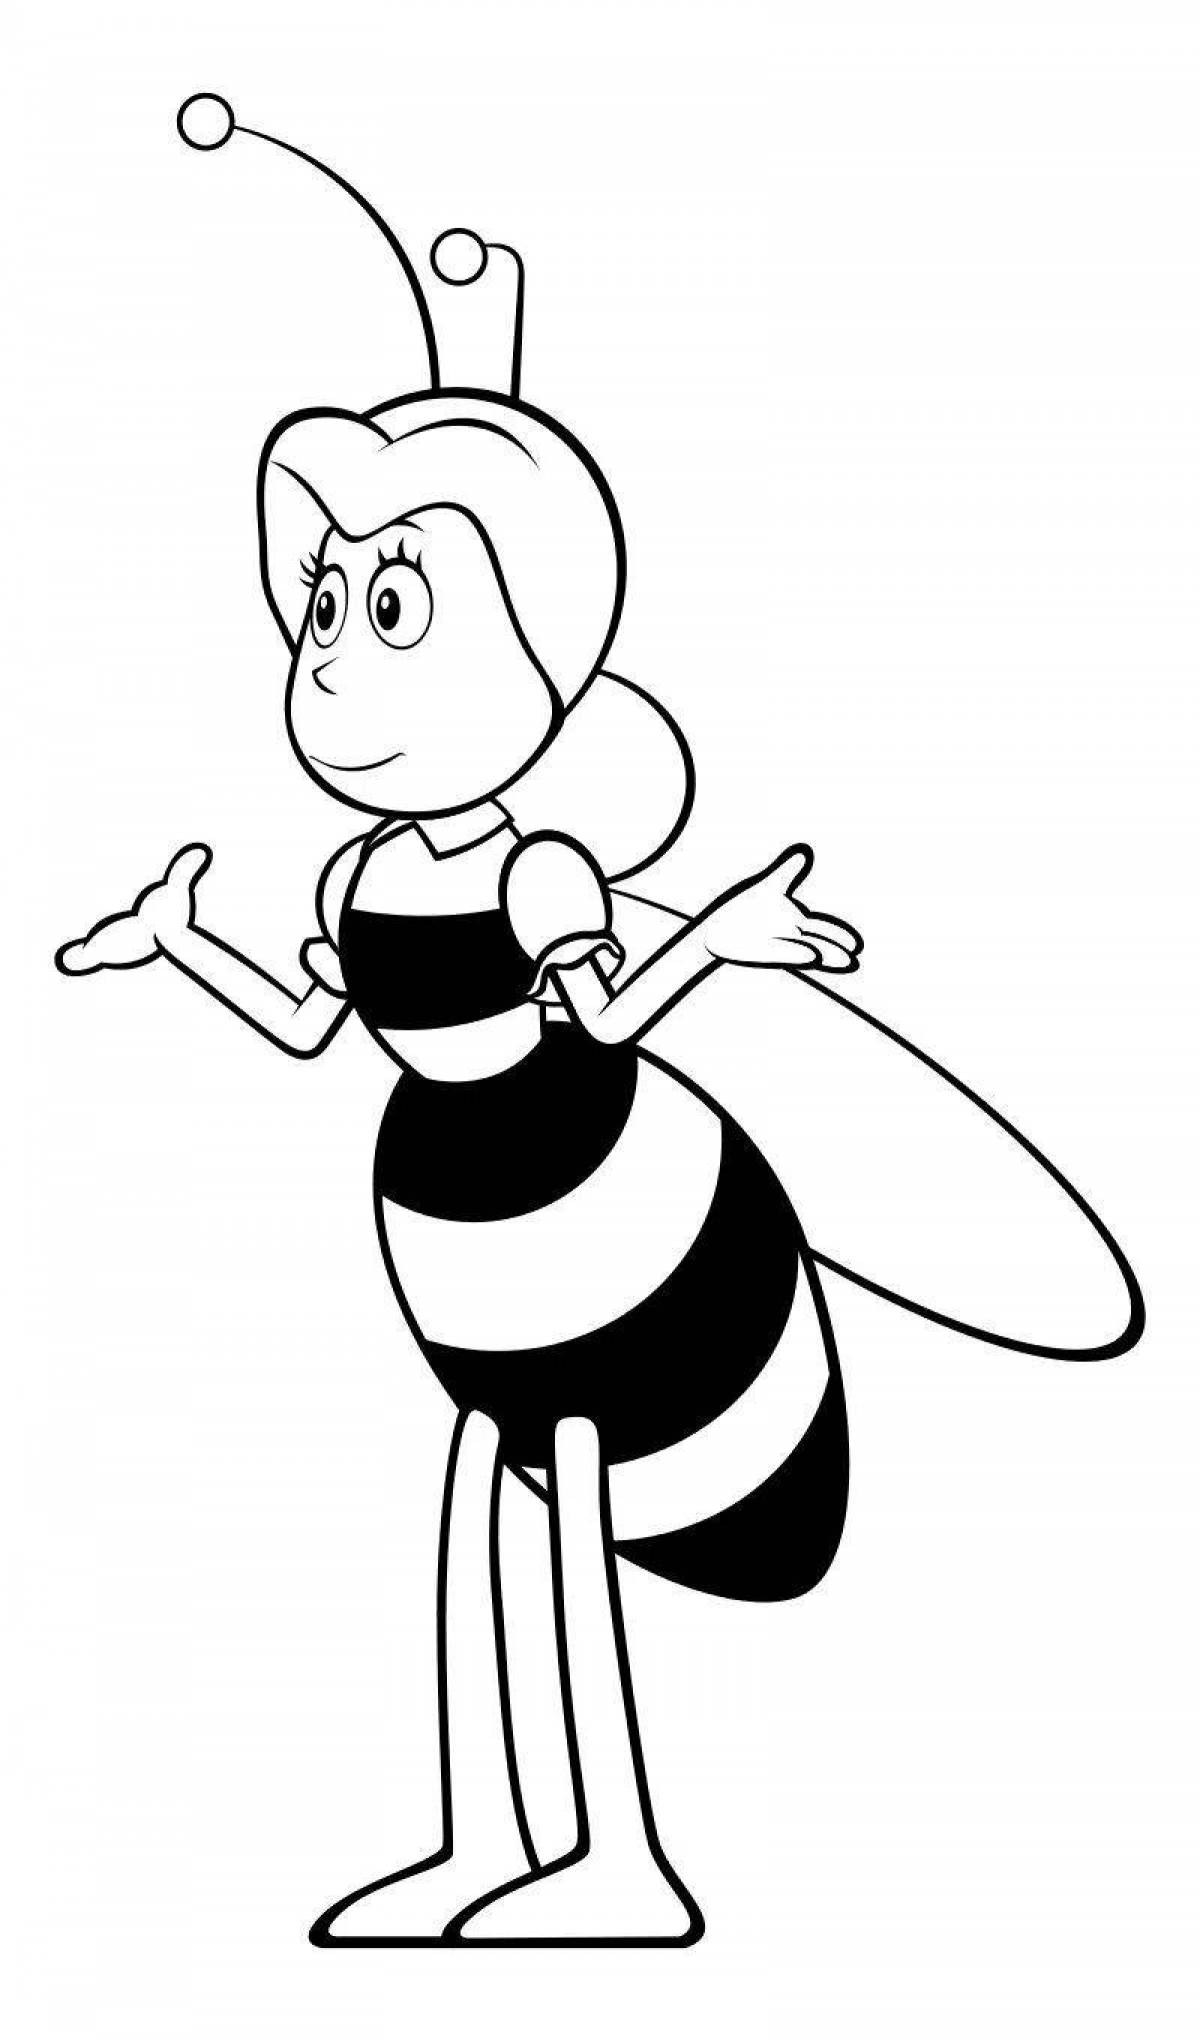 Color-frenzy maya bee coloring page for children